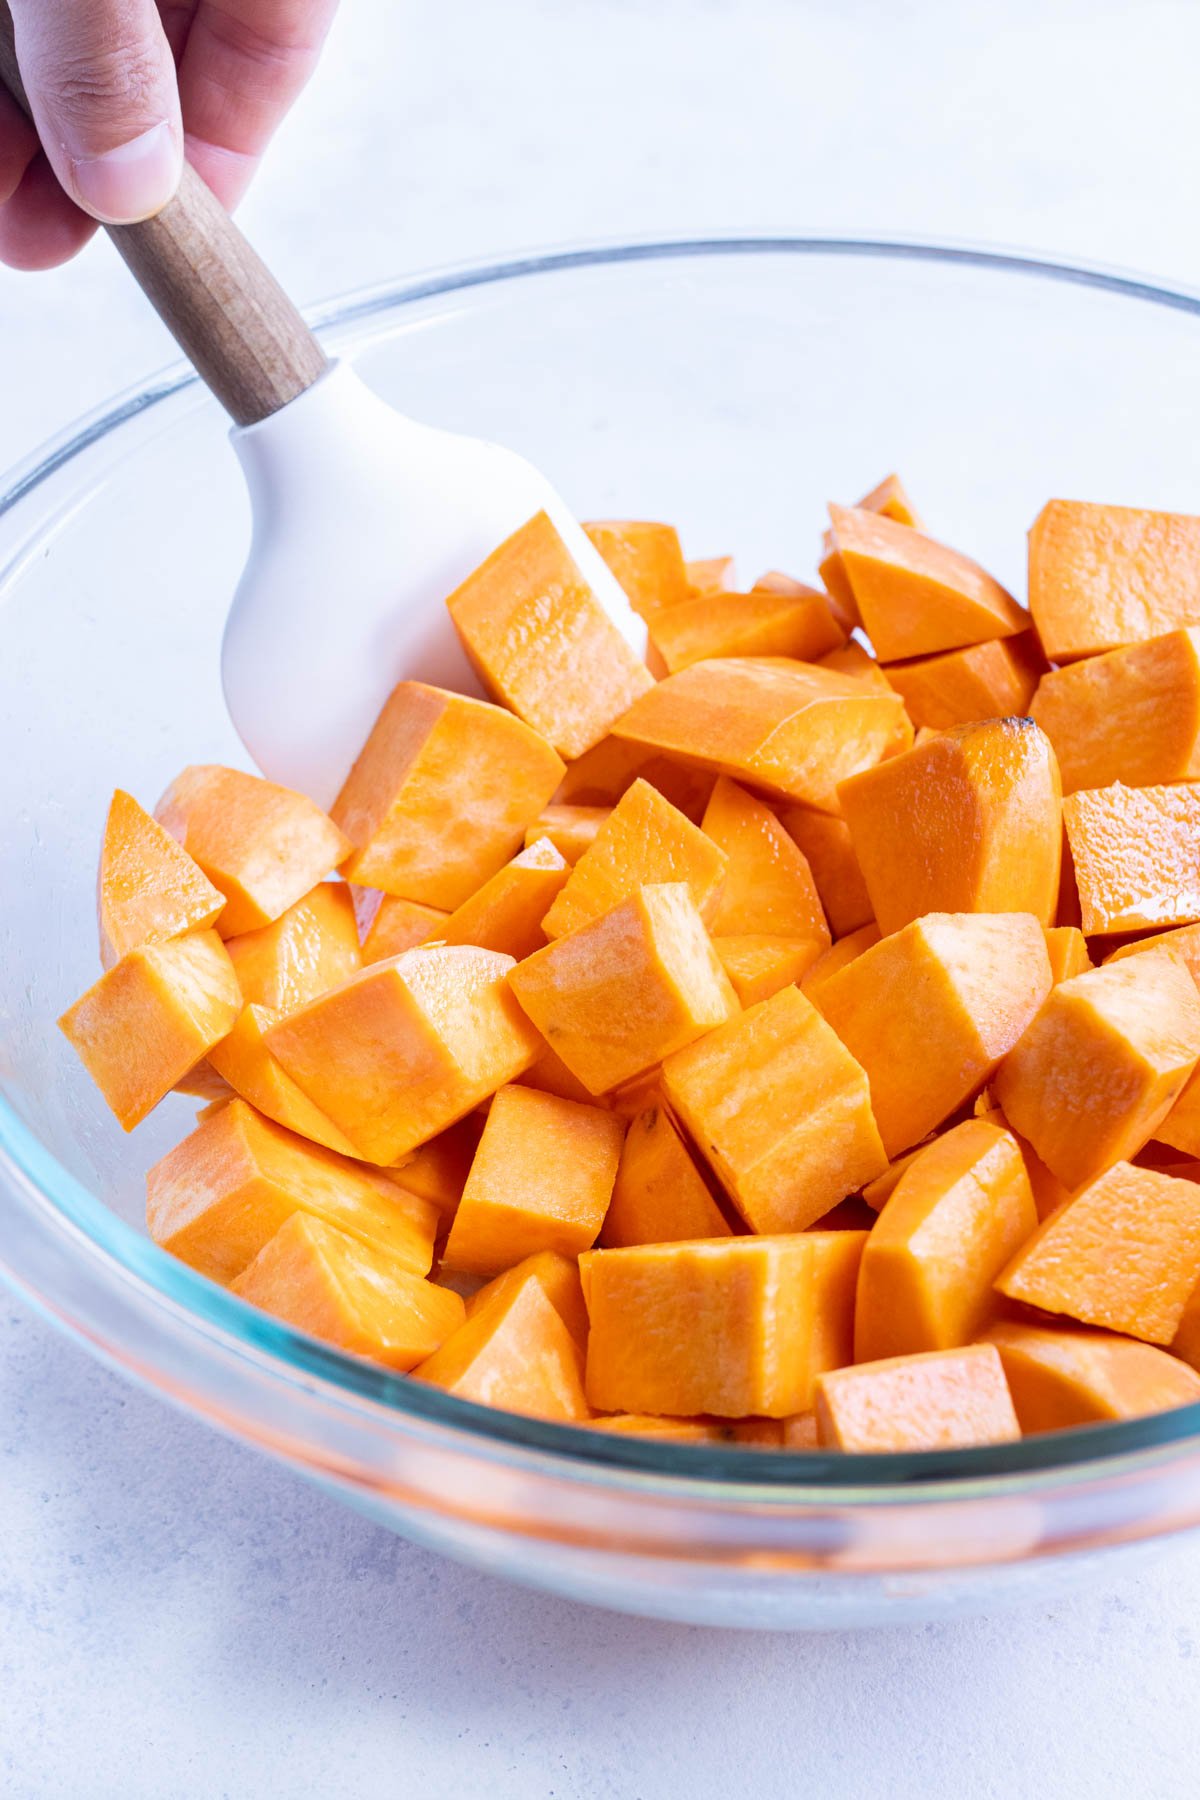 Sweet potatoes are tossed with oil.